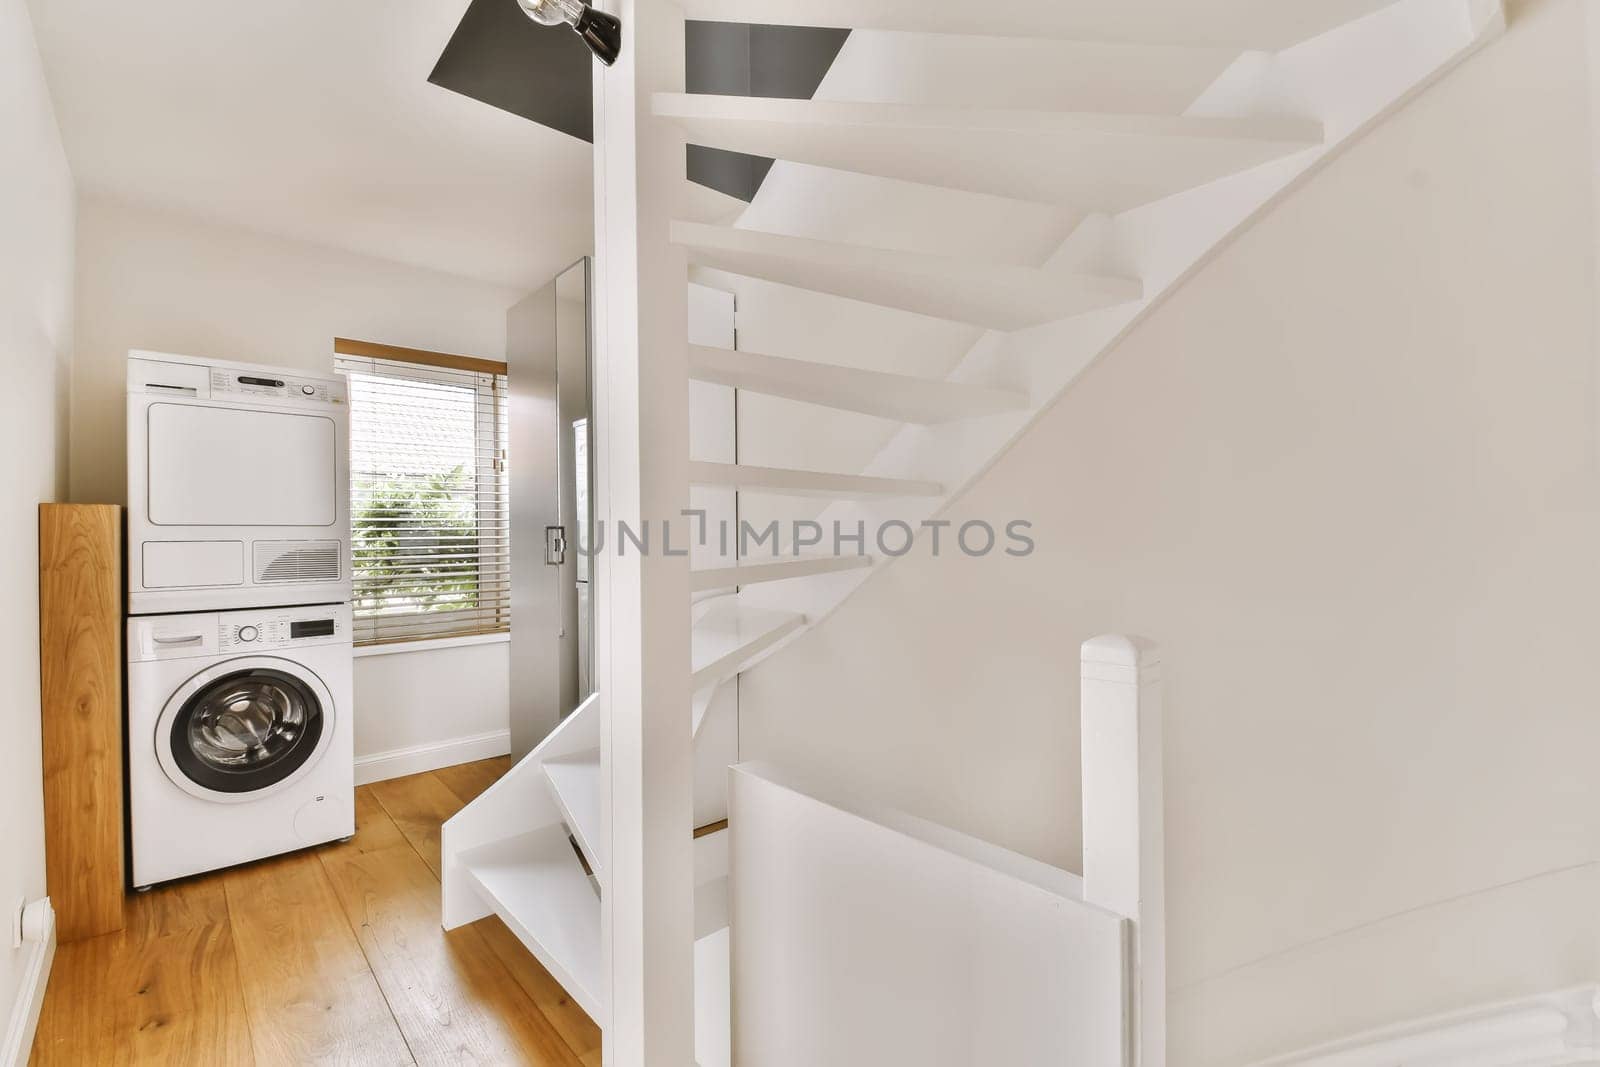 a laundry room with white walls and wood flooring, an open staircase leading up to the upper landing area